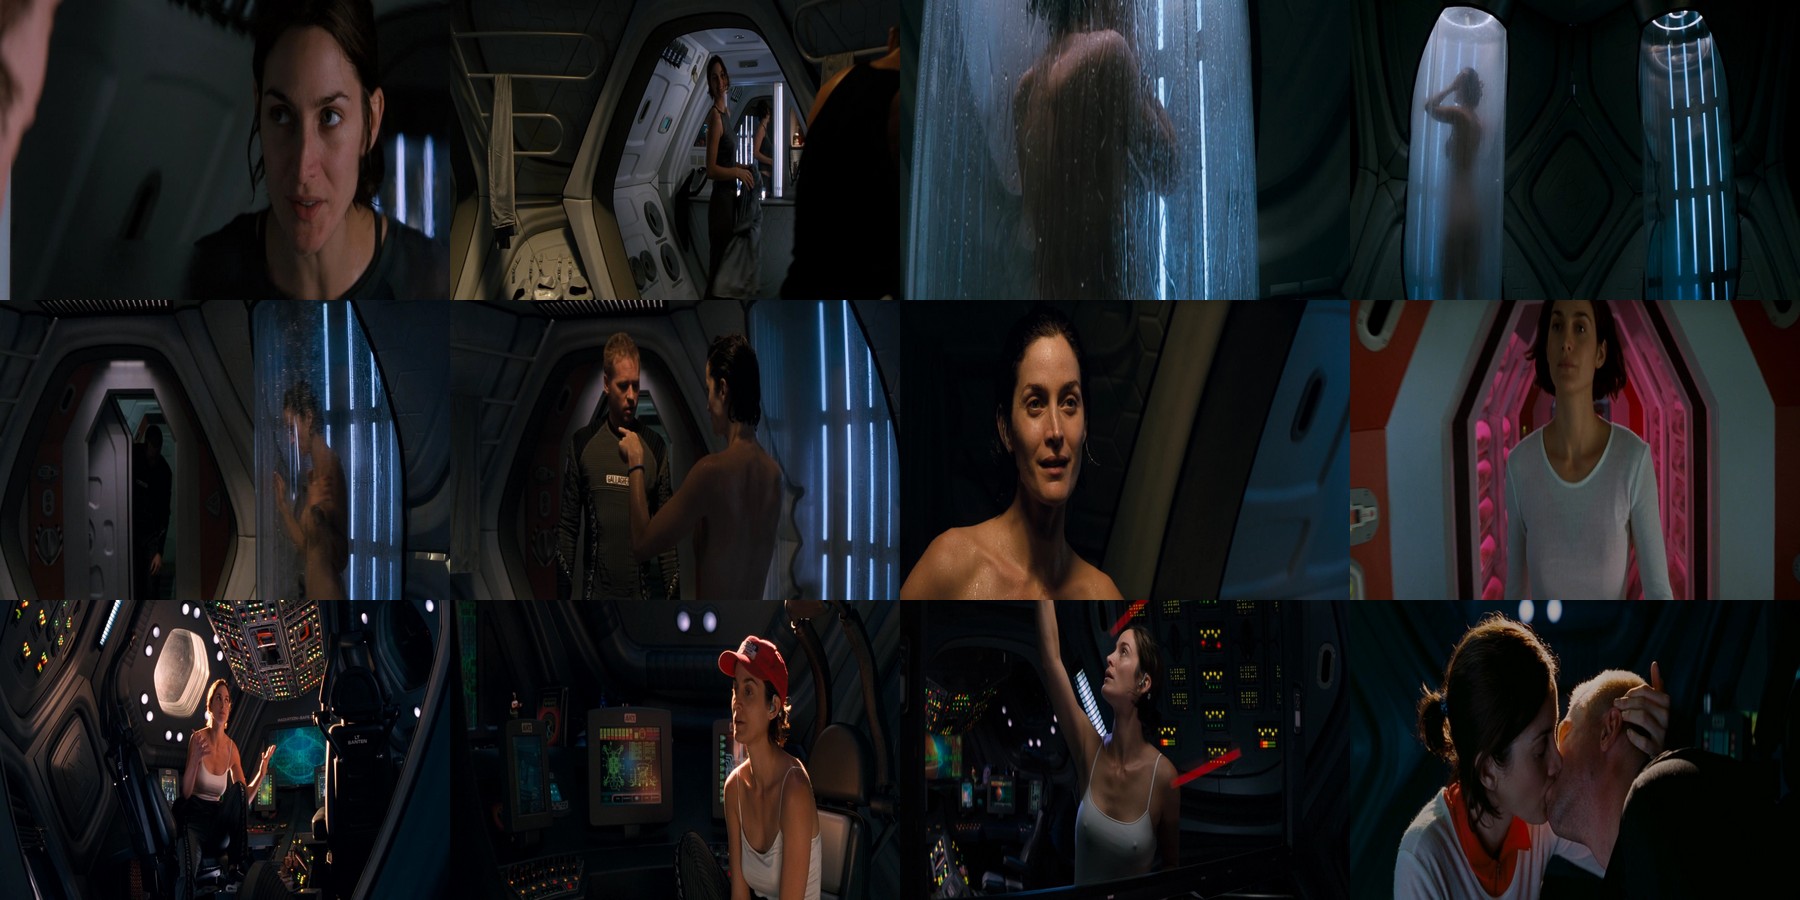 Carrie anne moss nipples